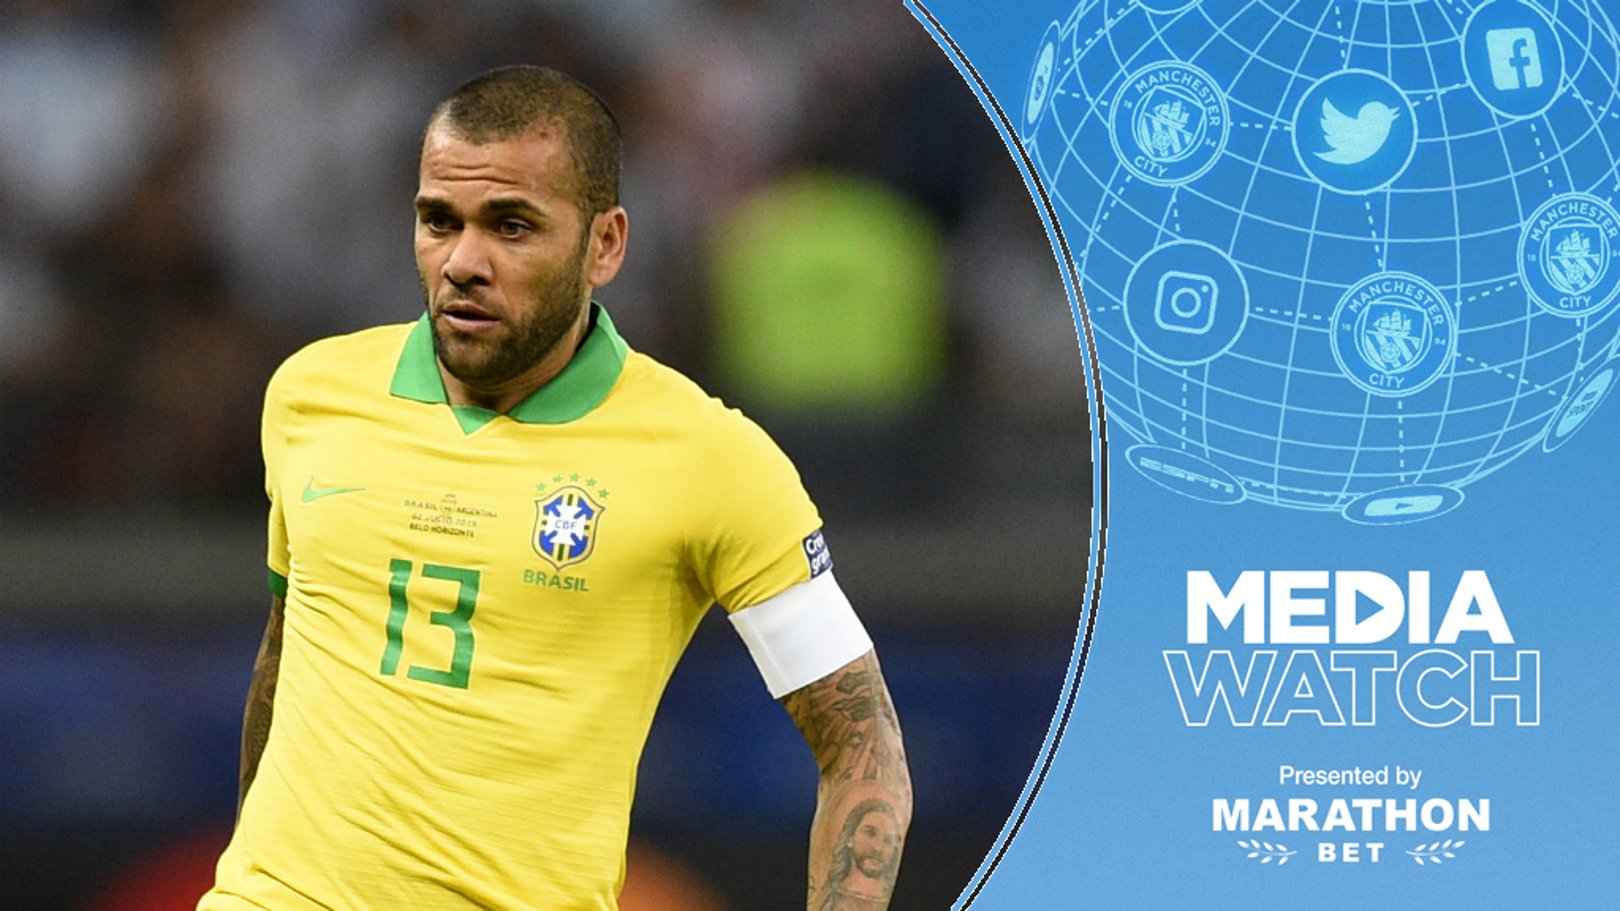 Media Watch: City face competition for Alves?